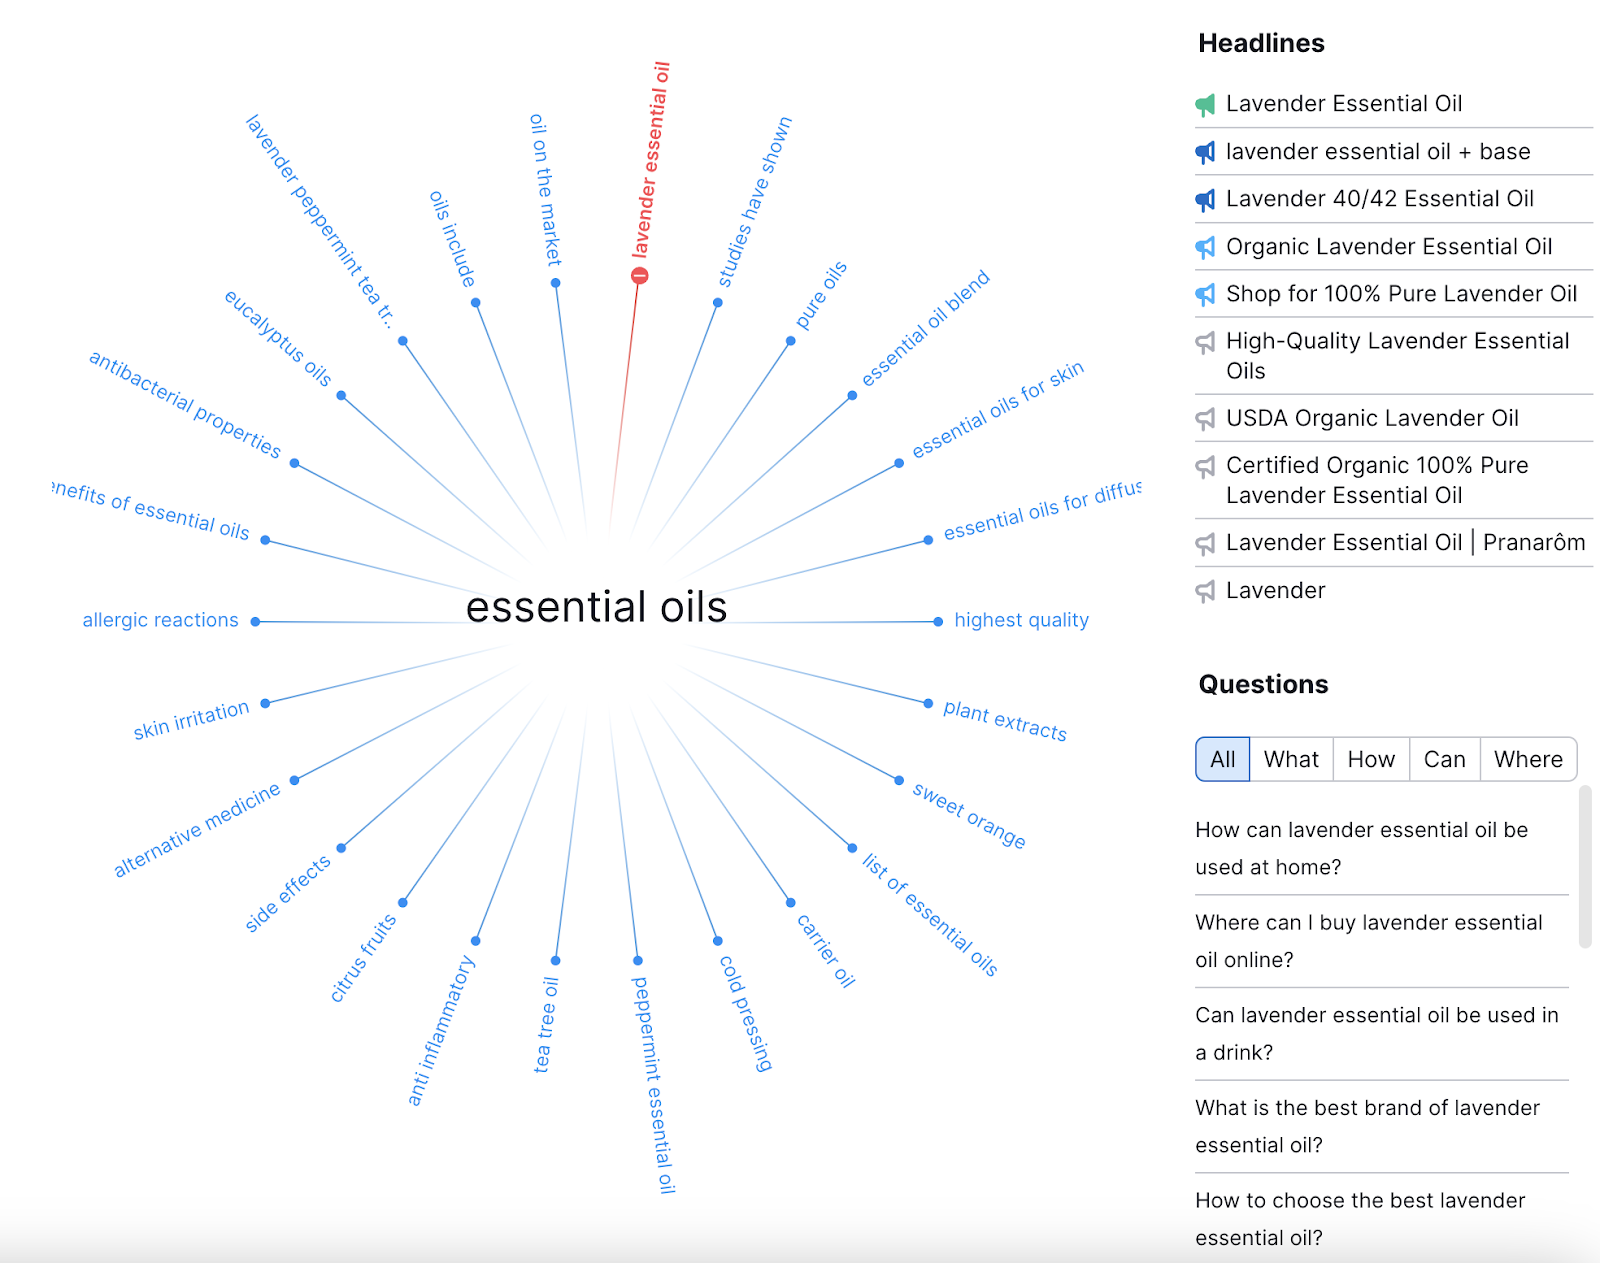 topic research tool's mind map view of essential oils with topics ،n،g out from the center